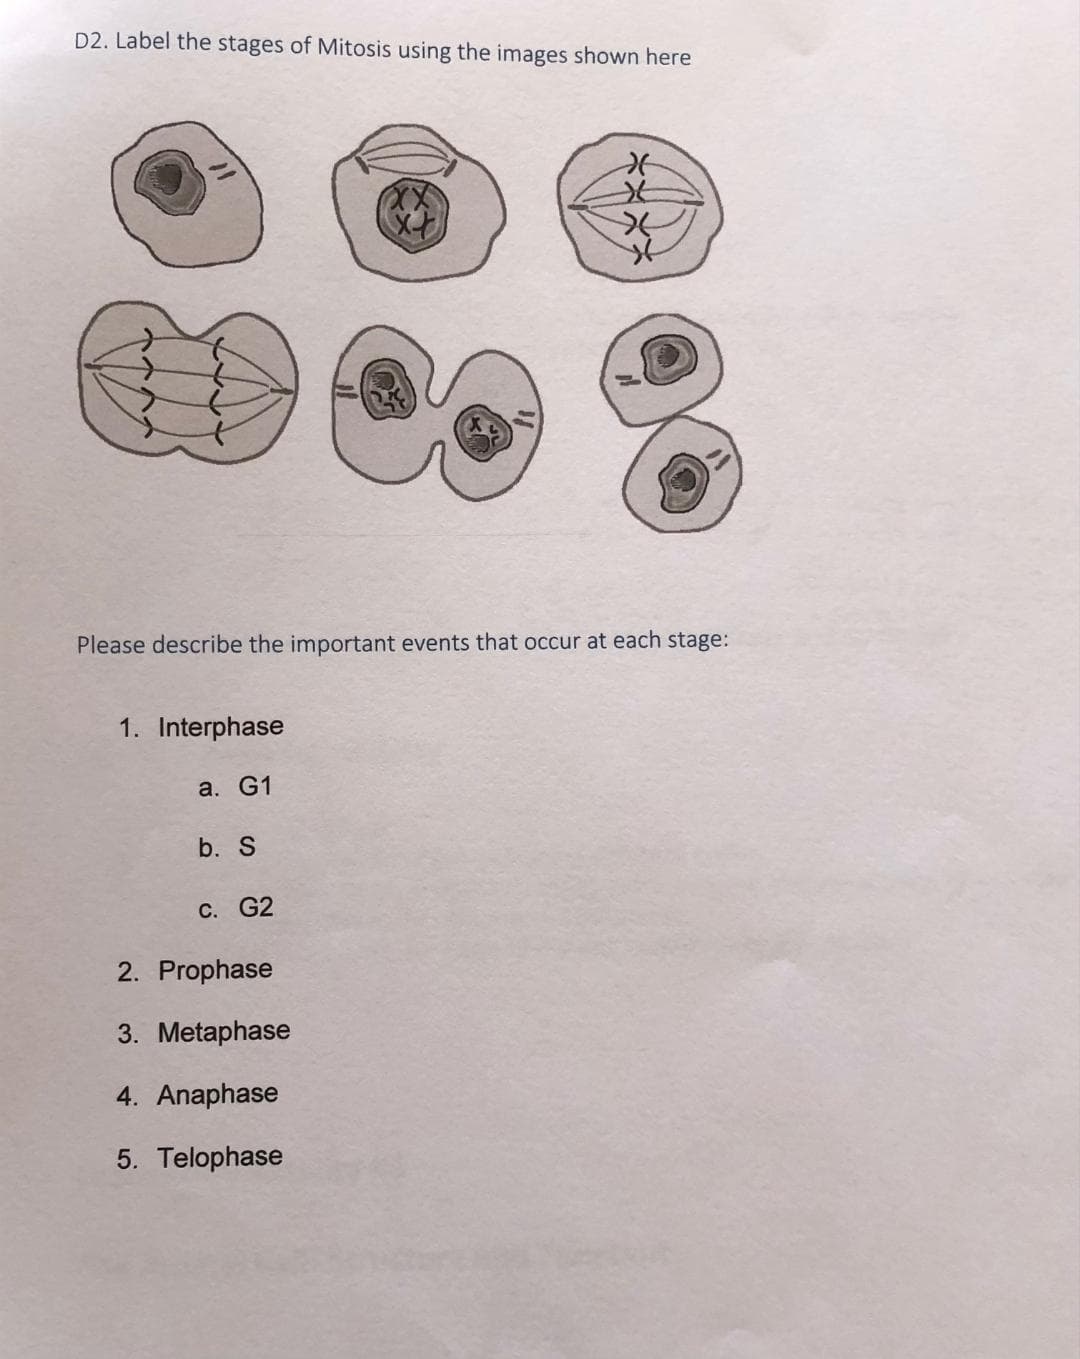 D2. Label the stages of Mitosis using the images shown here
Please describe the important events that occur at each stage:
1. Interphase
а. G1
b. S
С. G2
2. Prophase
3. Metaphase
4. Anaphase
5. Telophase
****
